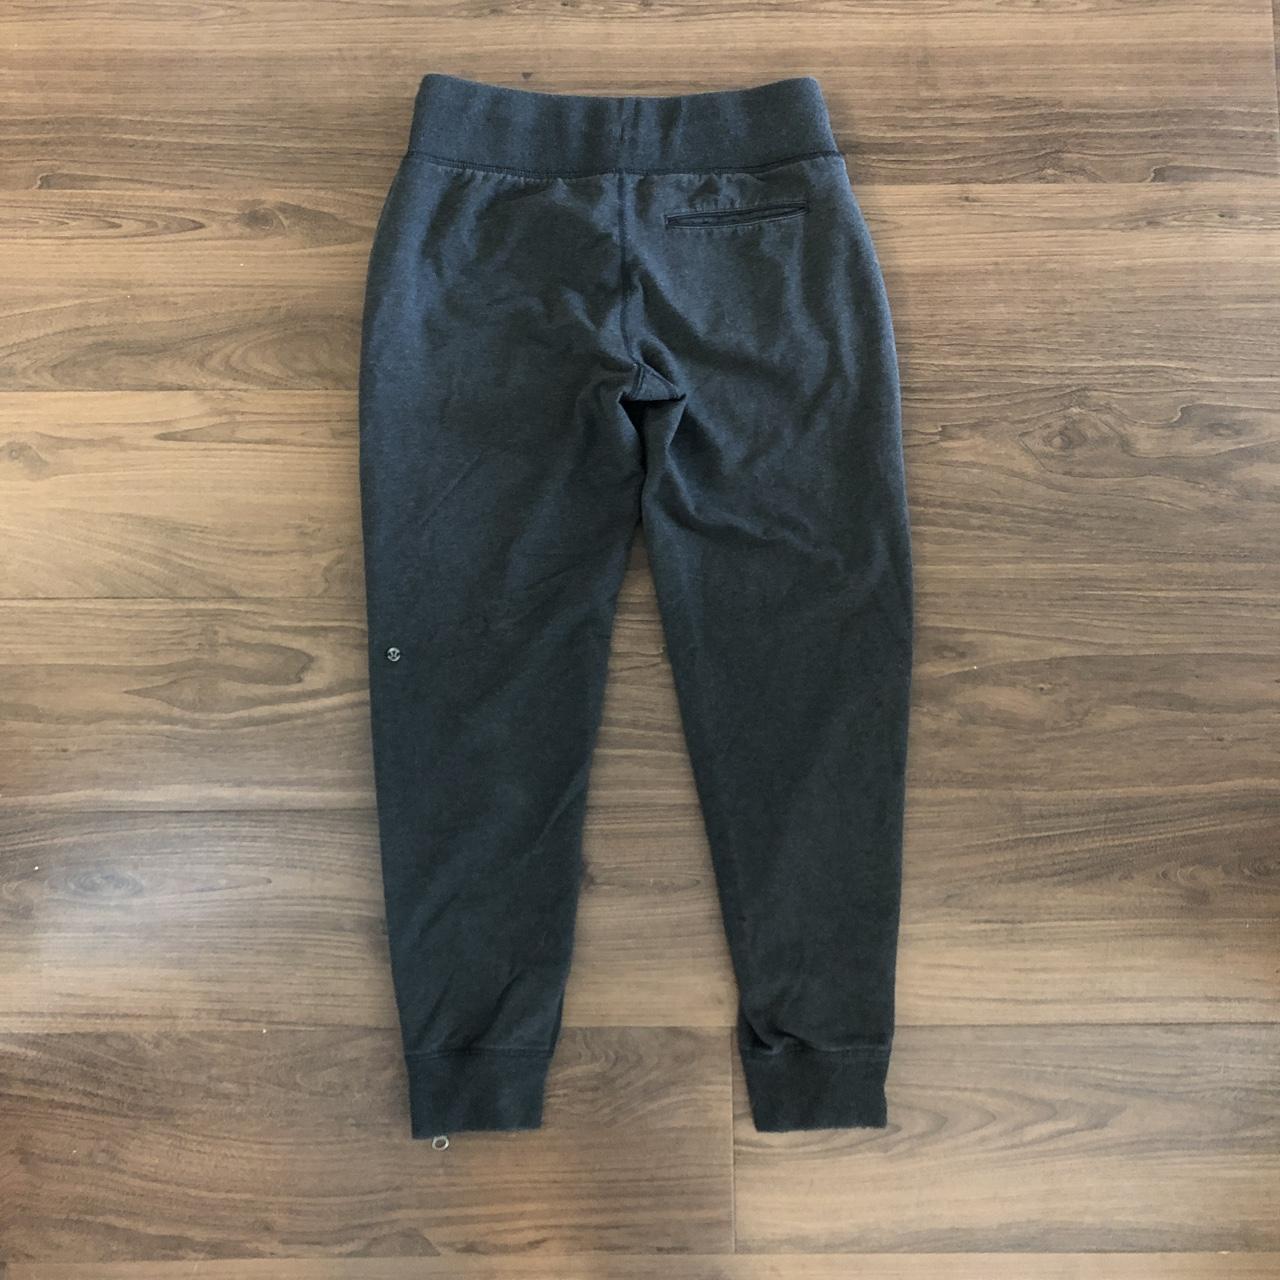 Lululemon joggers with full side zipper in size 6